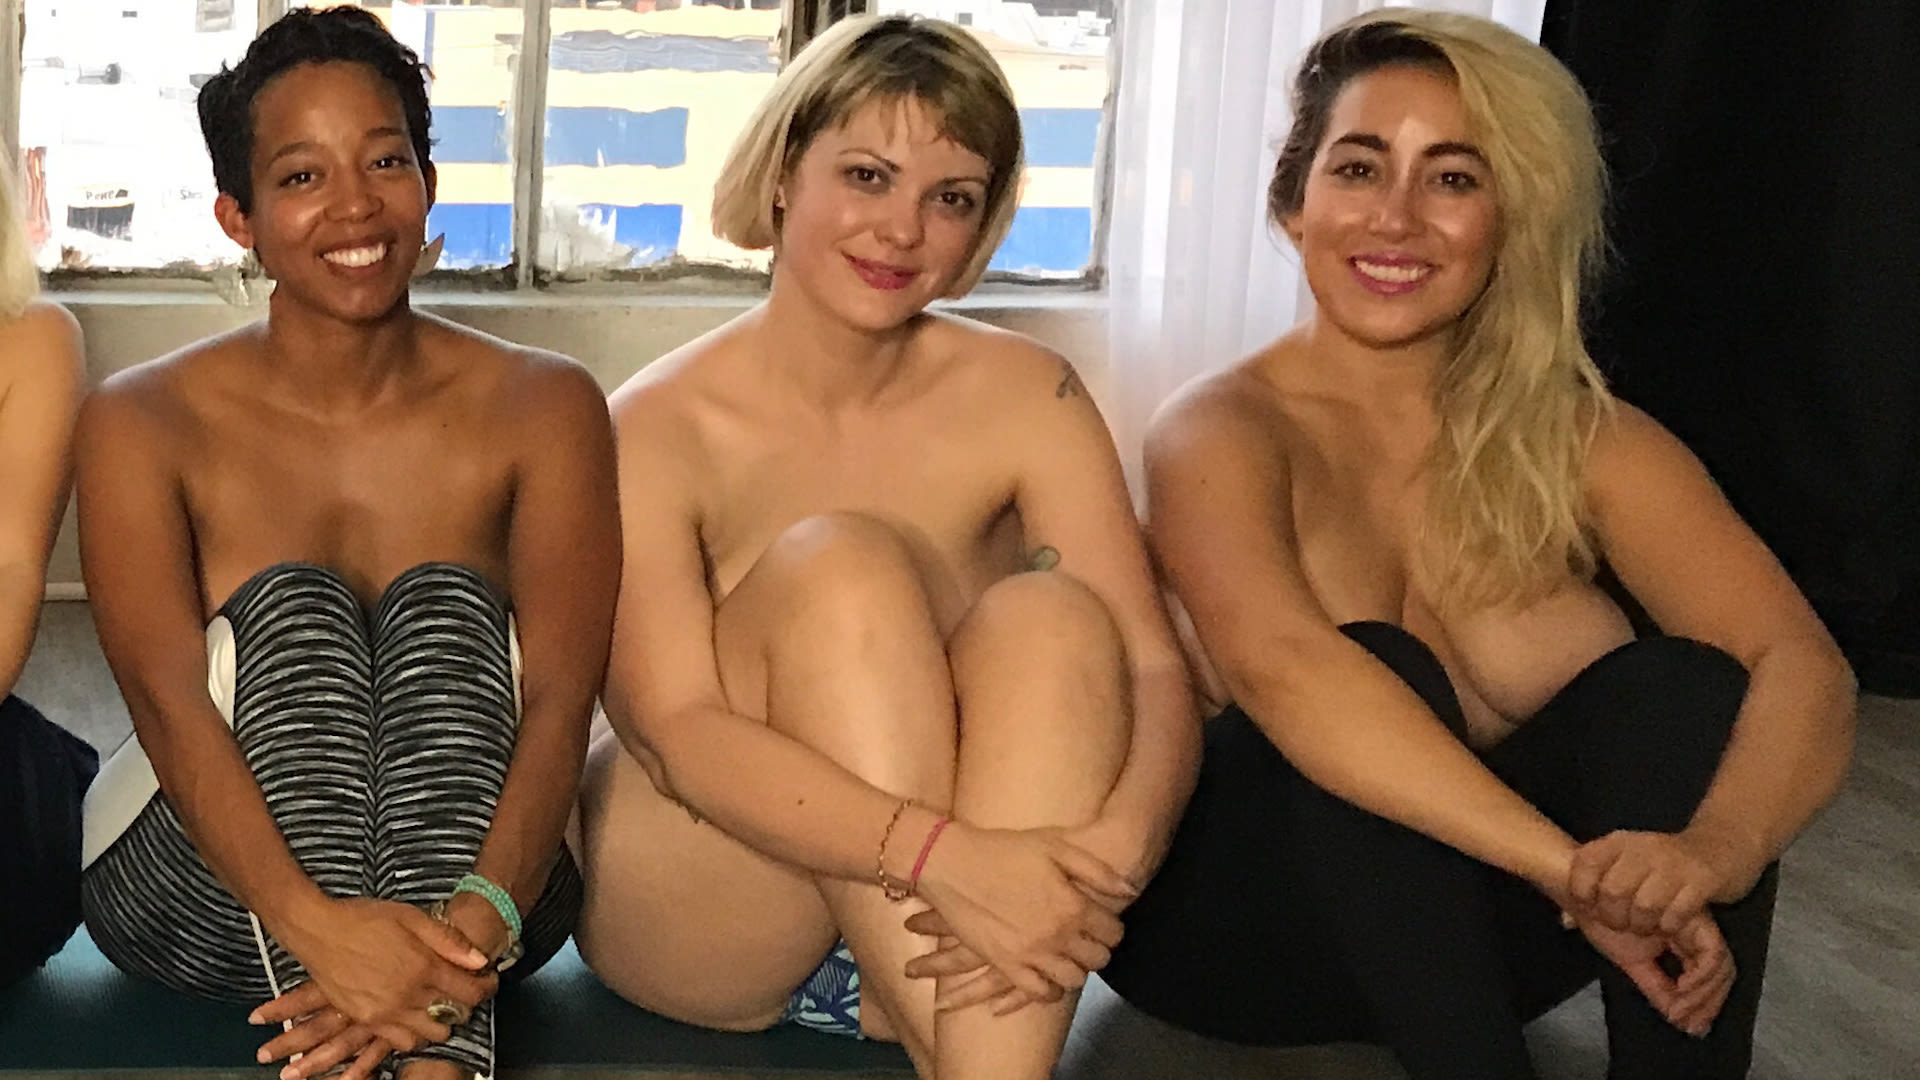 Watch Welcome to Free the Nipple Yoga—Where Women Are Free to Bare